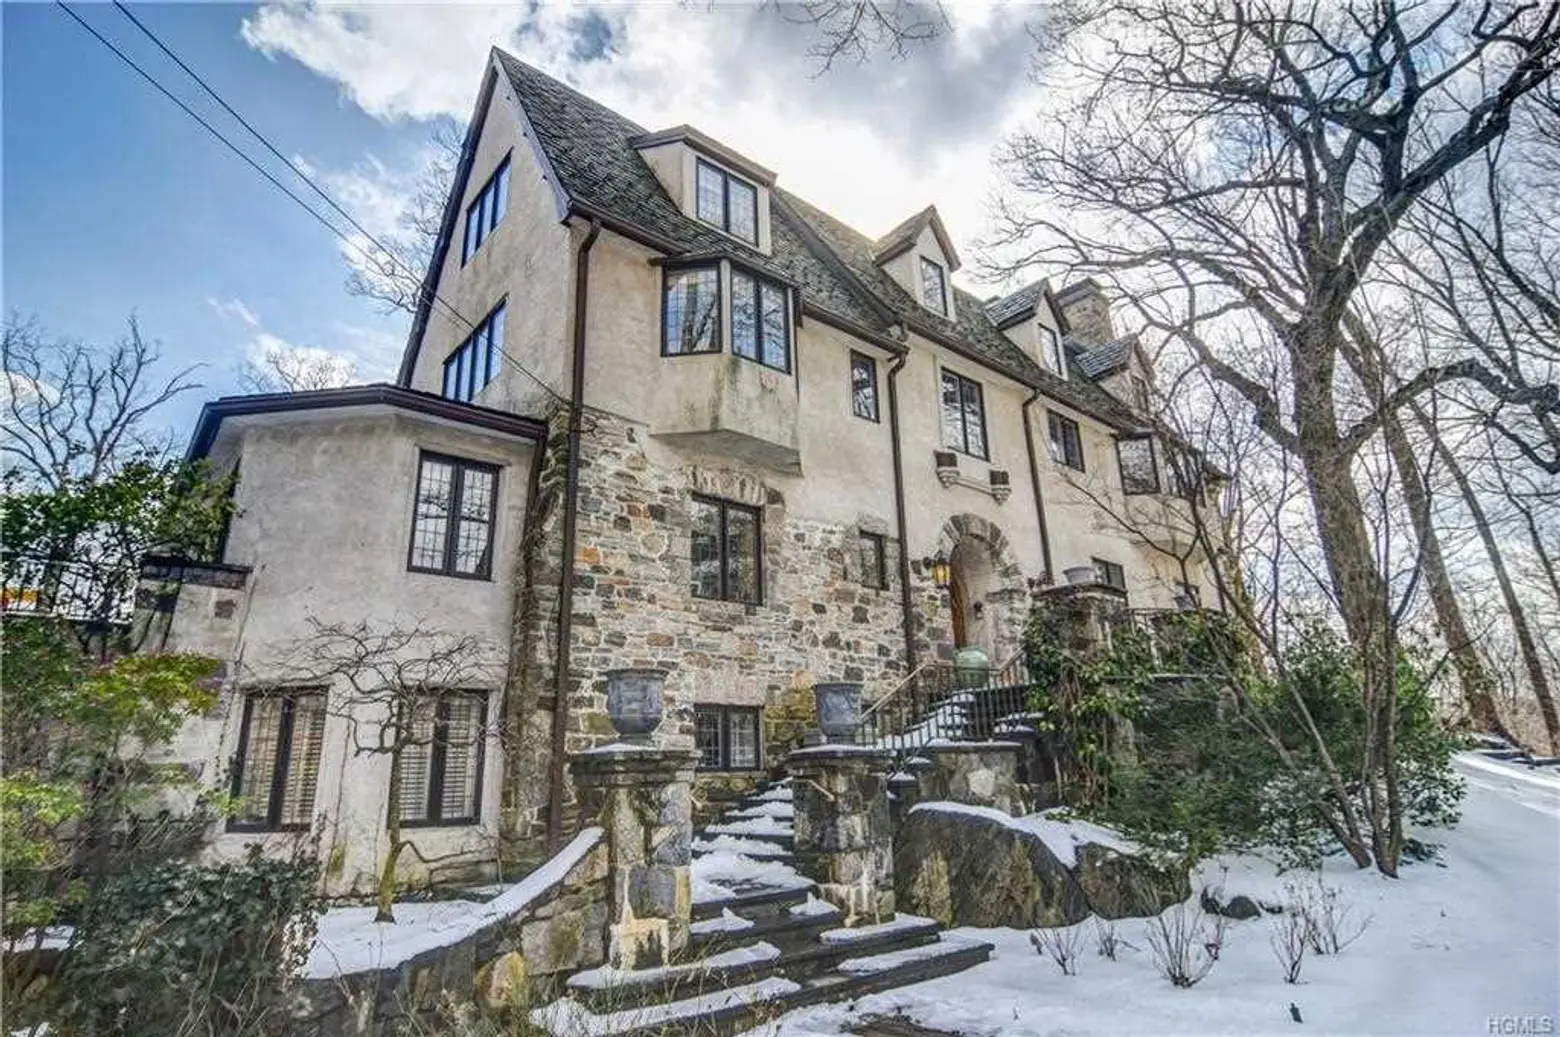 16-room Tudor beauty in the Bronx, complete with pond, asks $5.6M